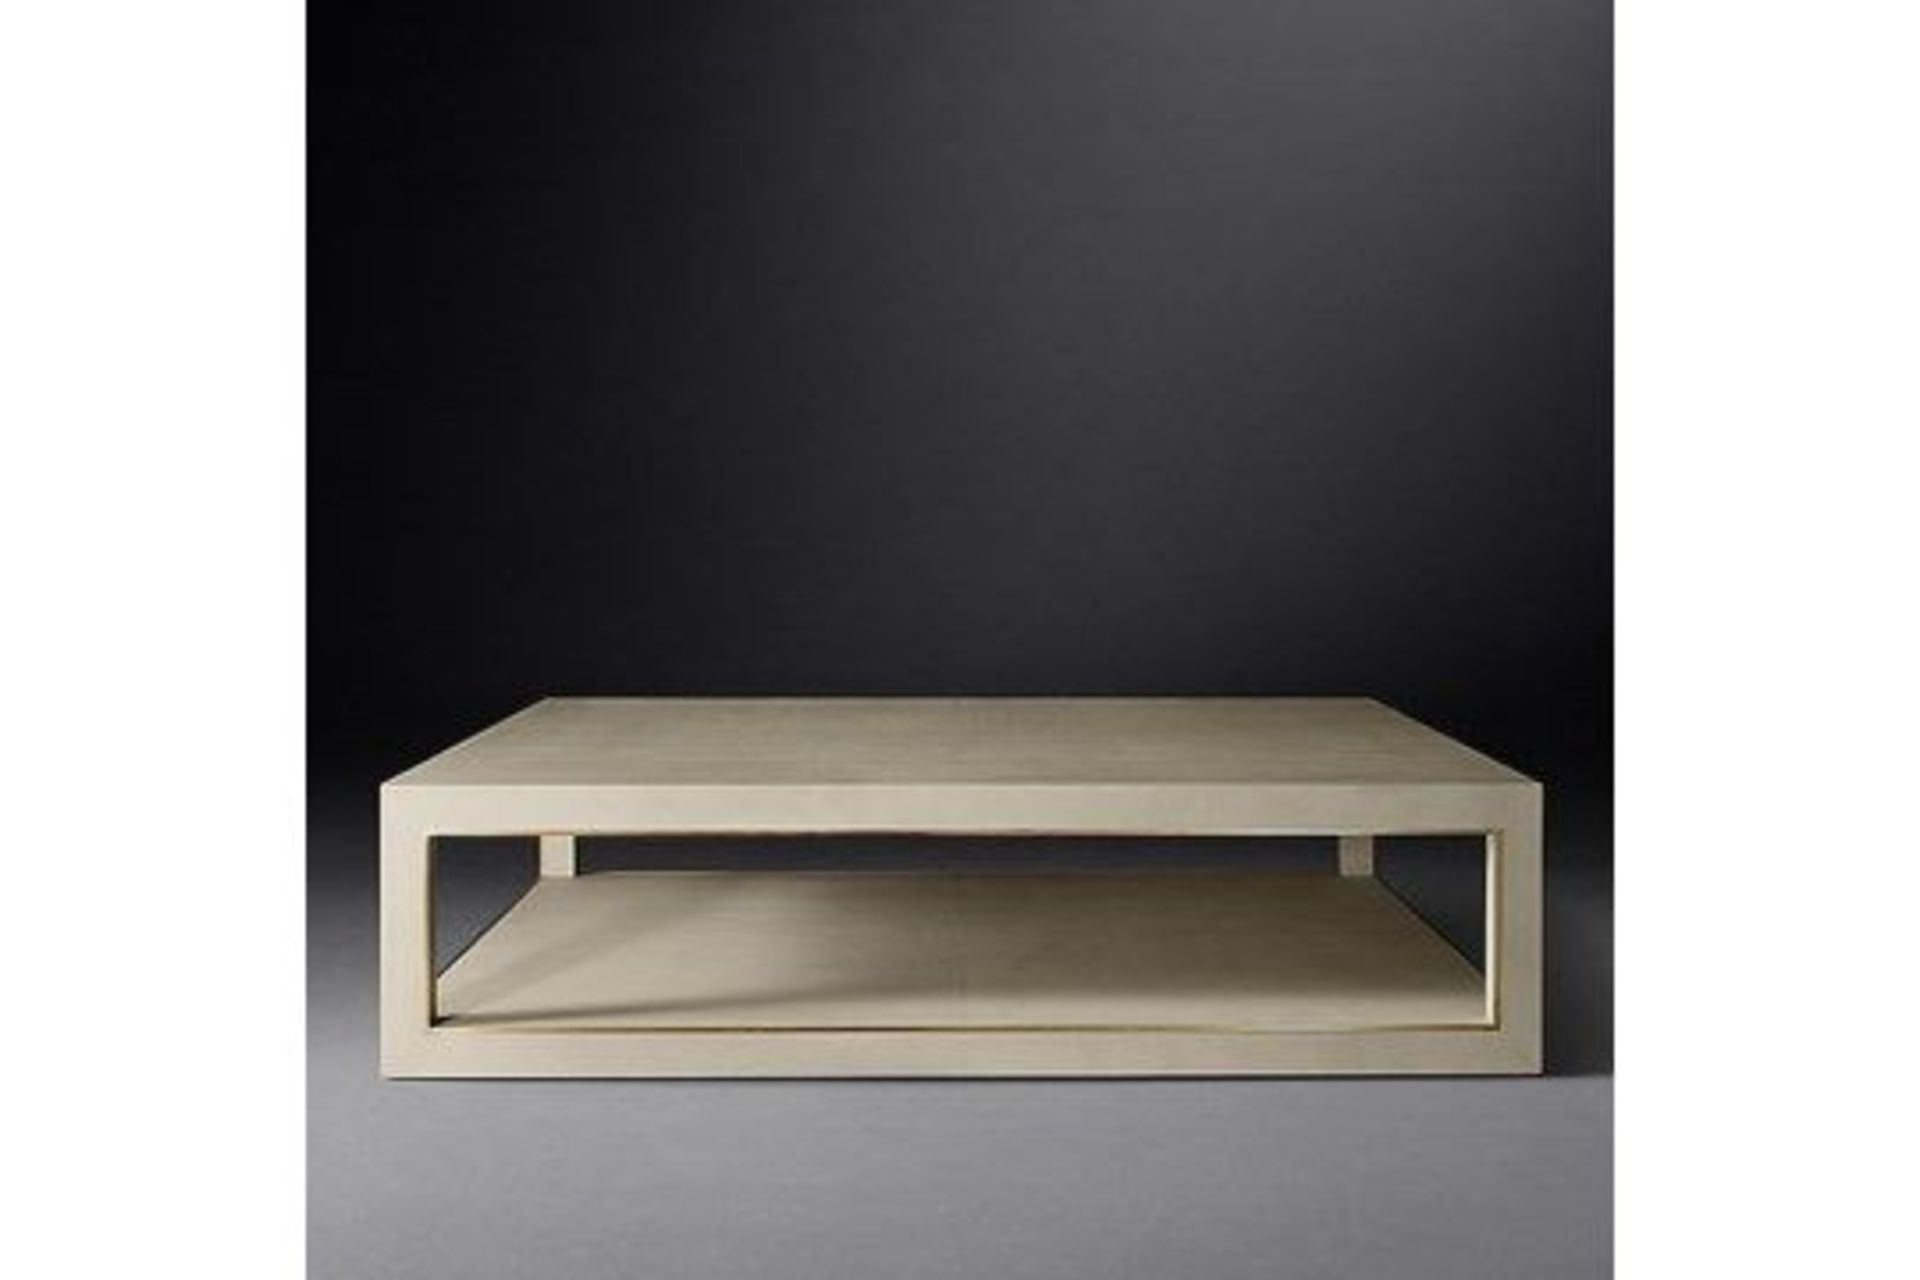 Cela Cream White 55 Shagreen Rectangular Coffee Table Crafted Of Shagreen Embossed Leather With